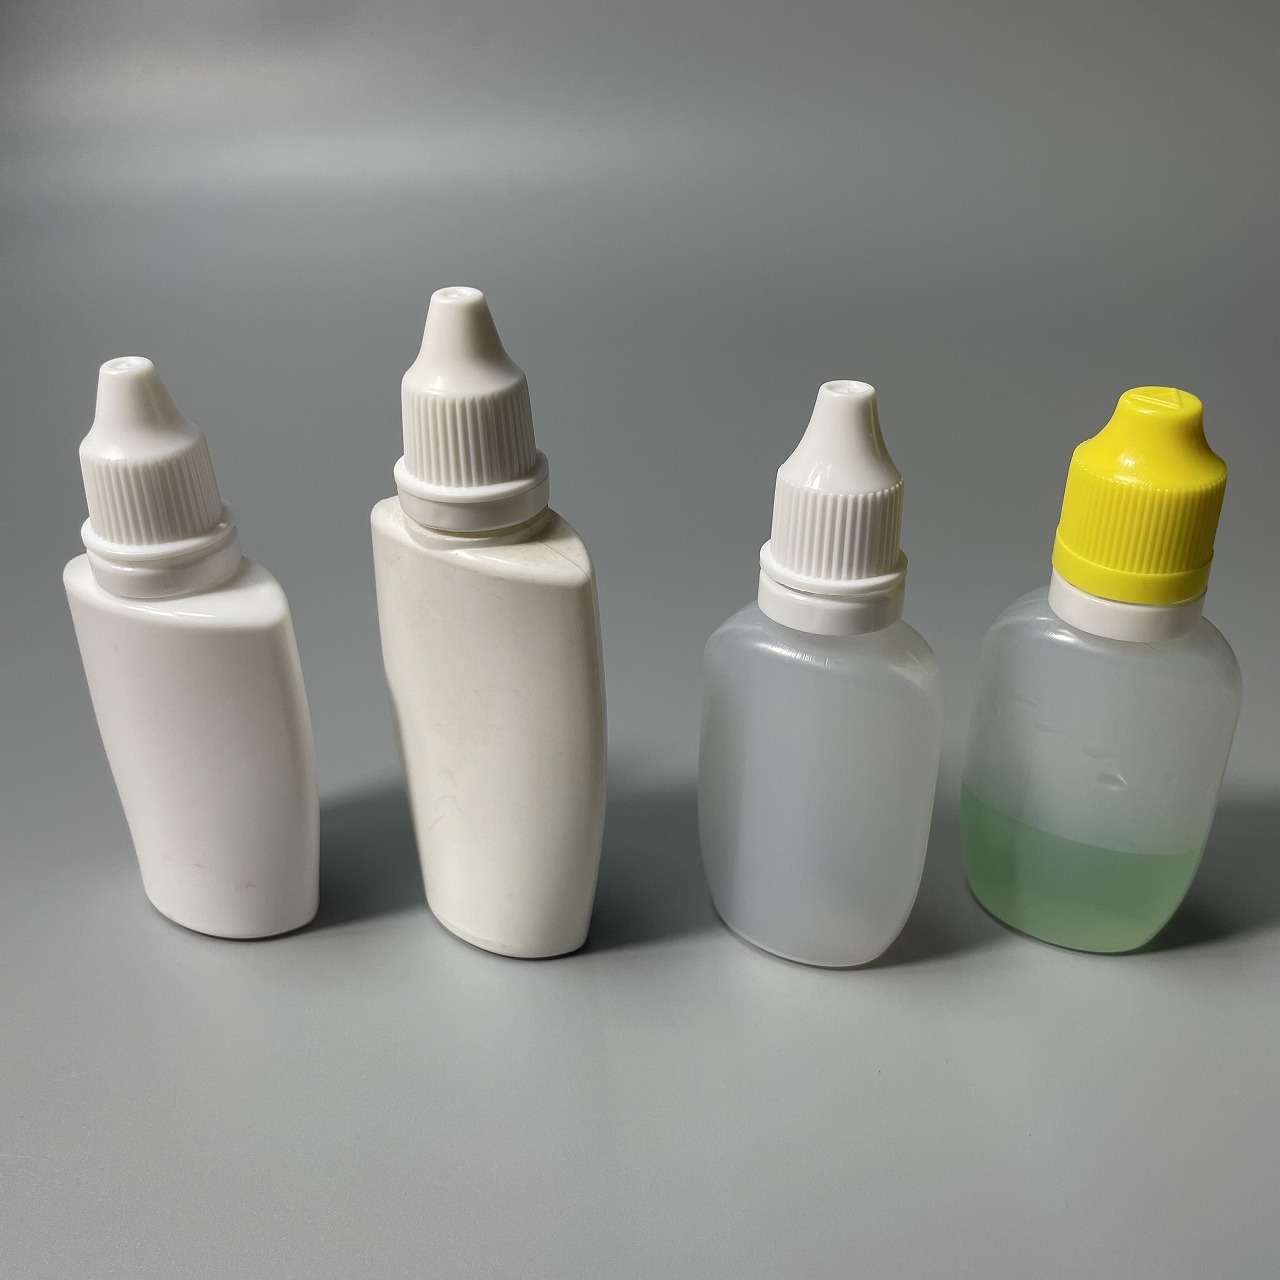 Wholesale Childproof PE 5ml Dropper Bottle Plastic With Long Thin Tips  Available In 3ml To 50ml Sizes From Cookiebag, $0.2